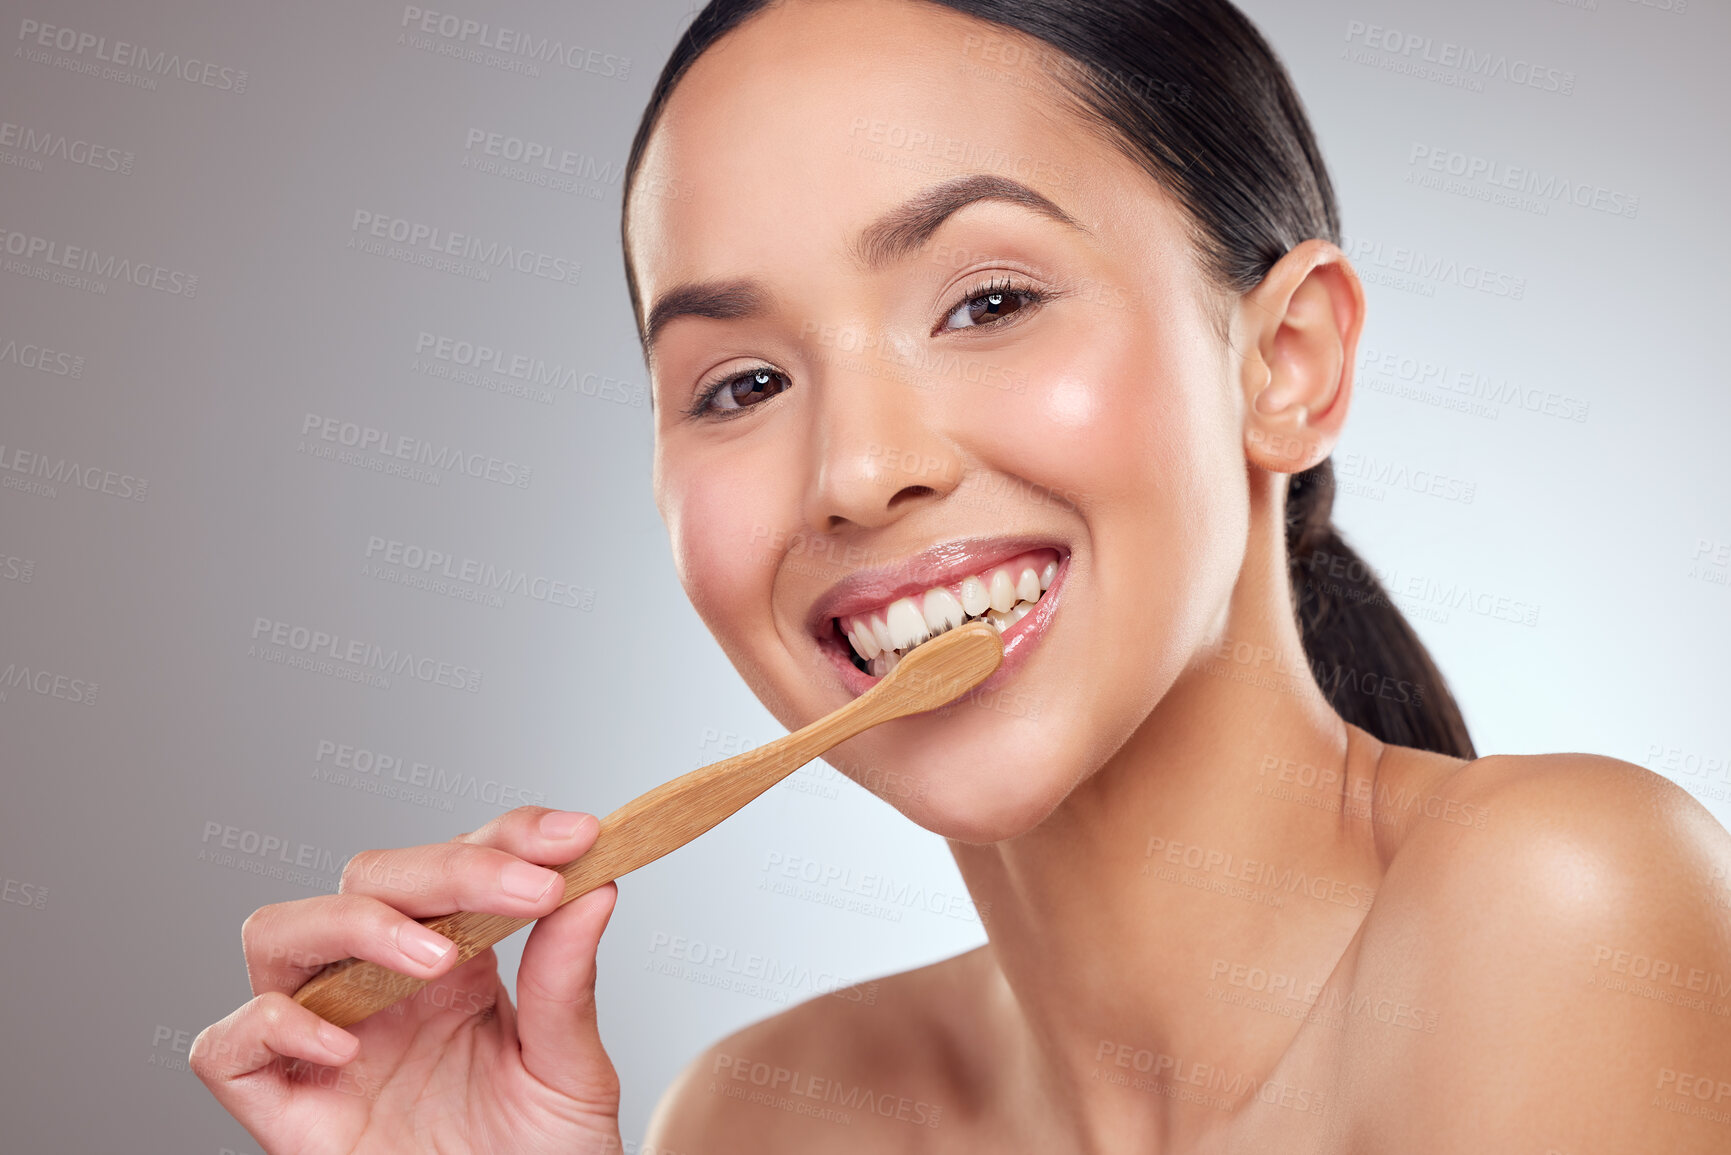 Buy stock photo Studio portrait of a beautiful young woman brushing her teeth against a grey background